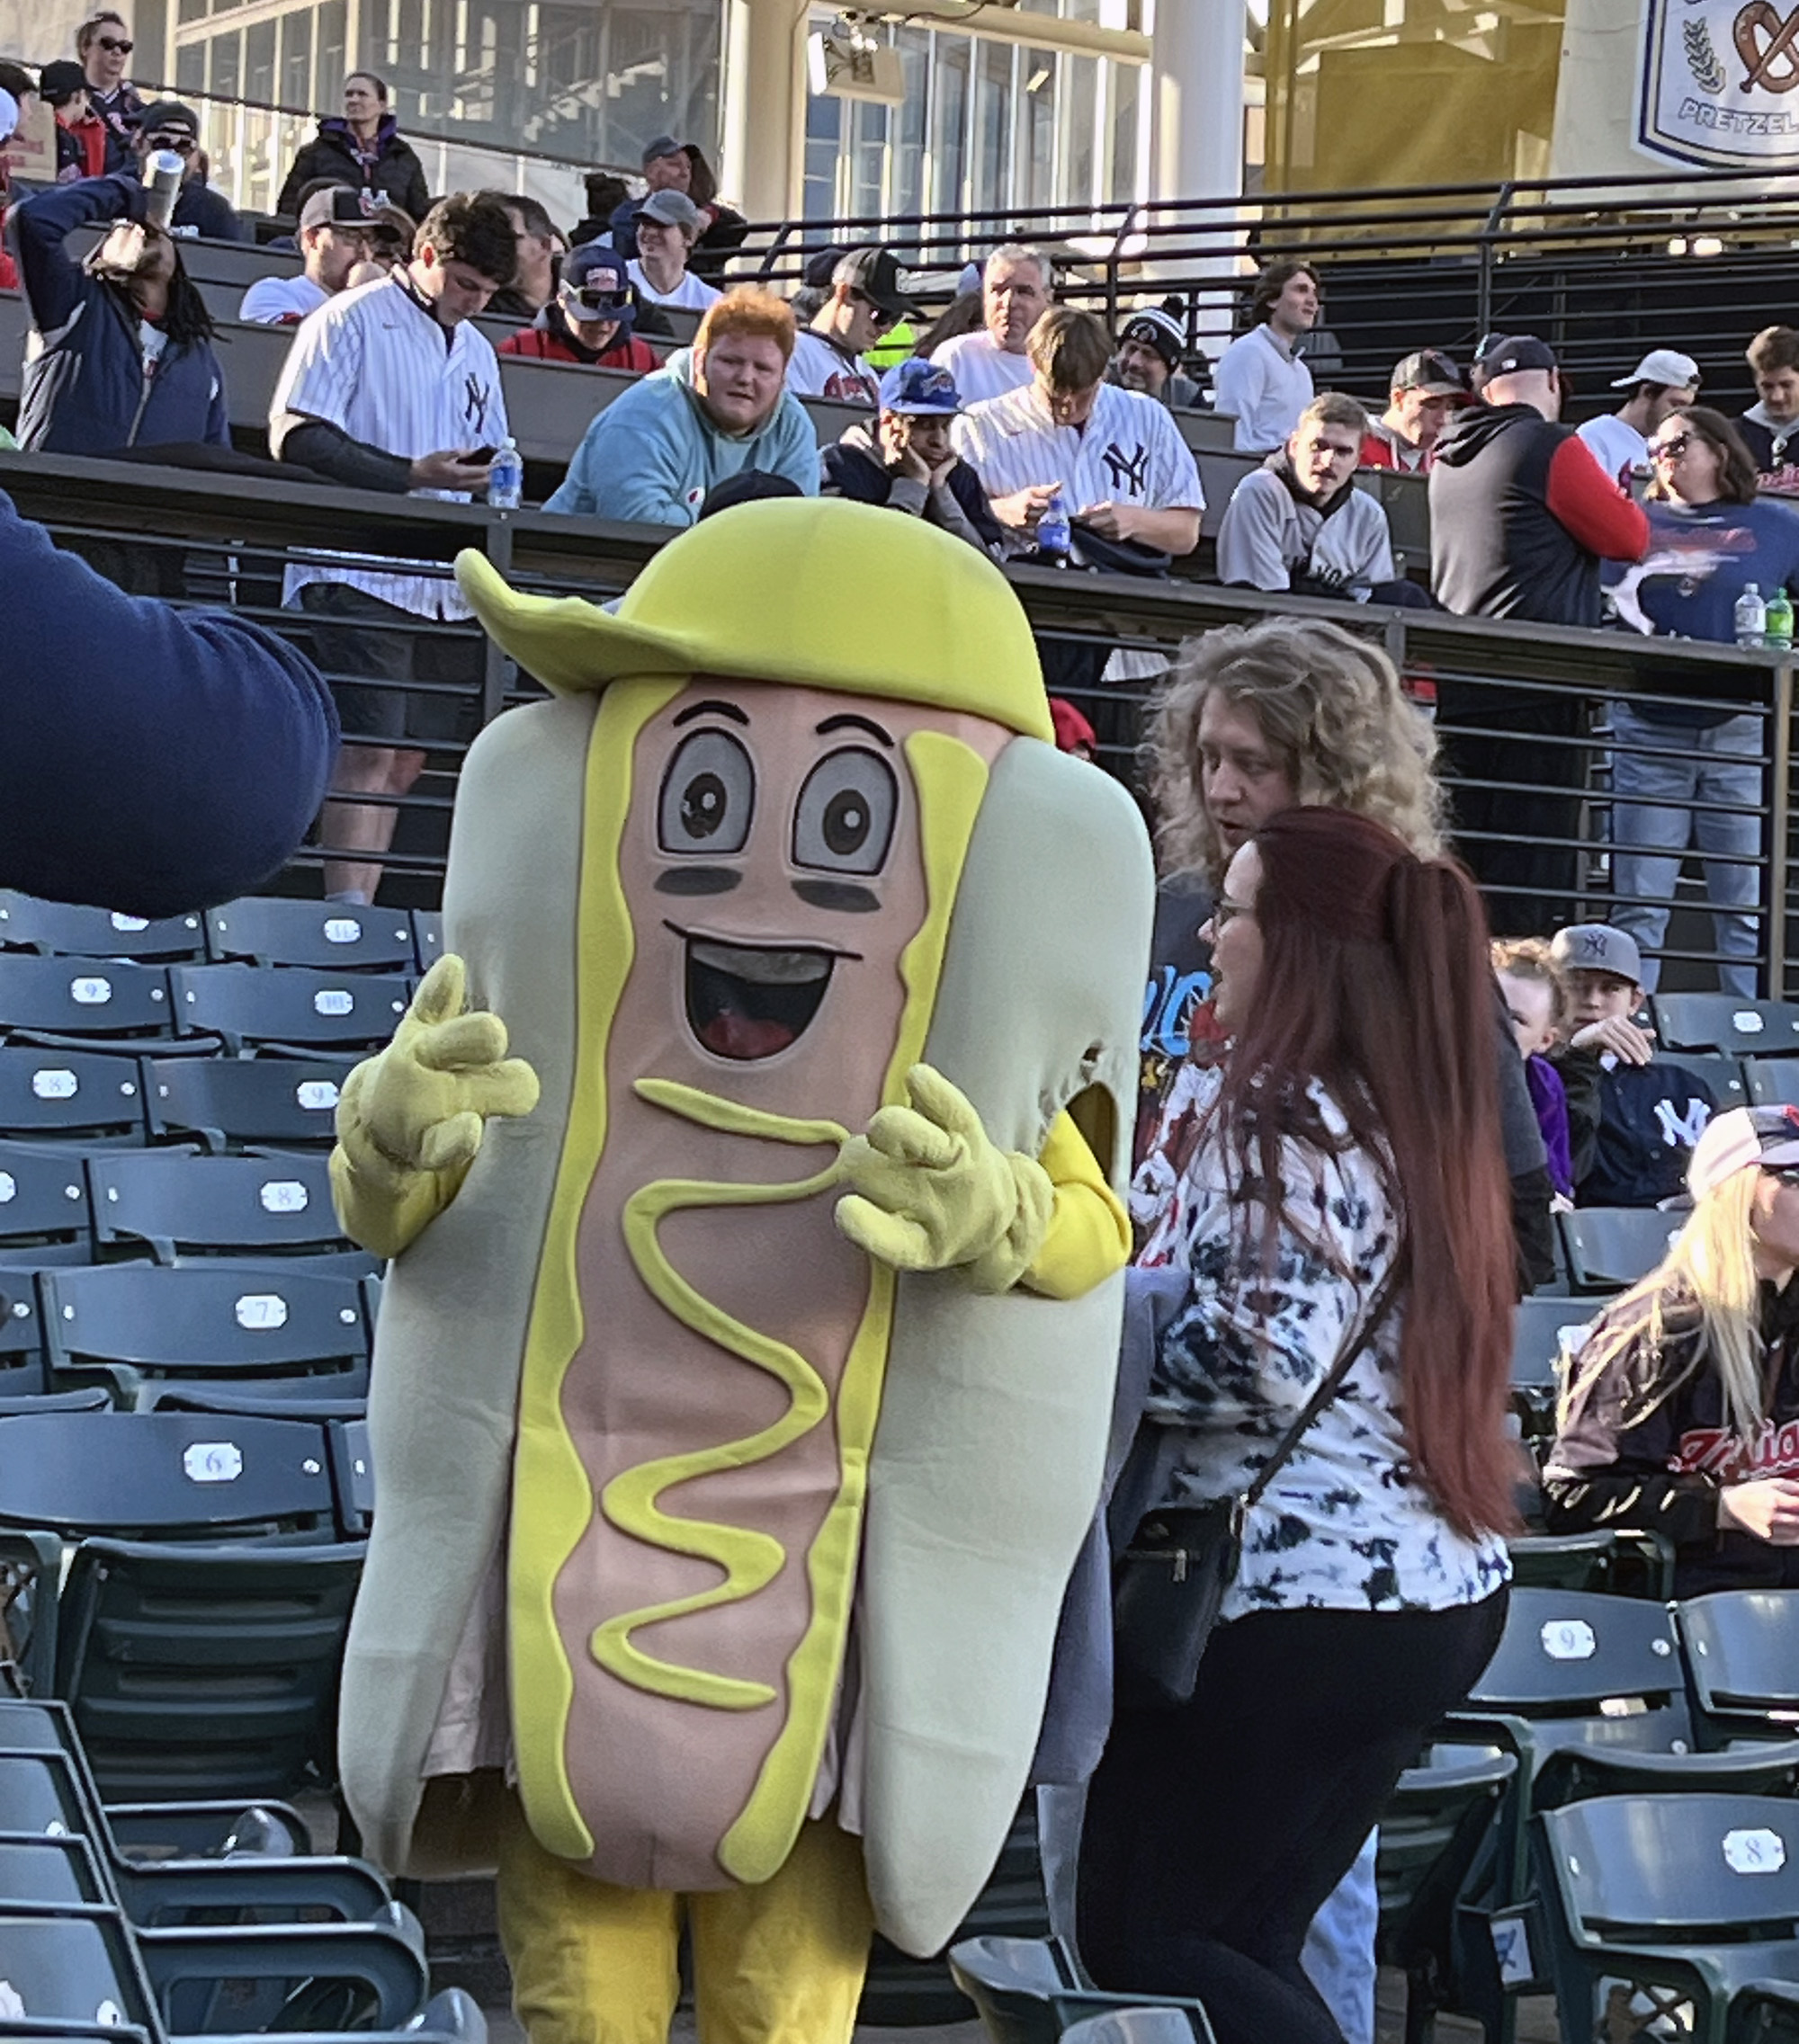 A man in a hot dog suit attends a baseball game.